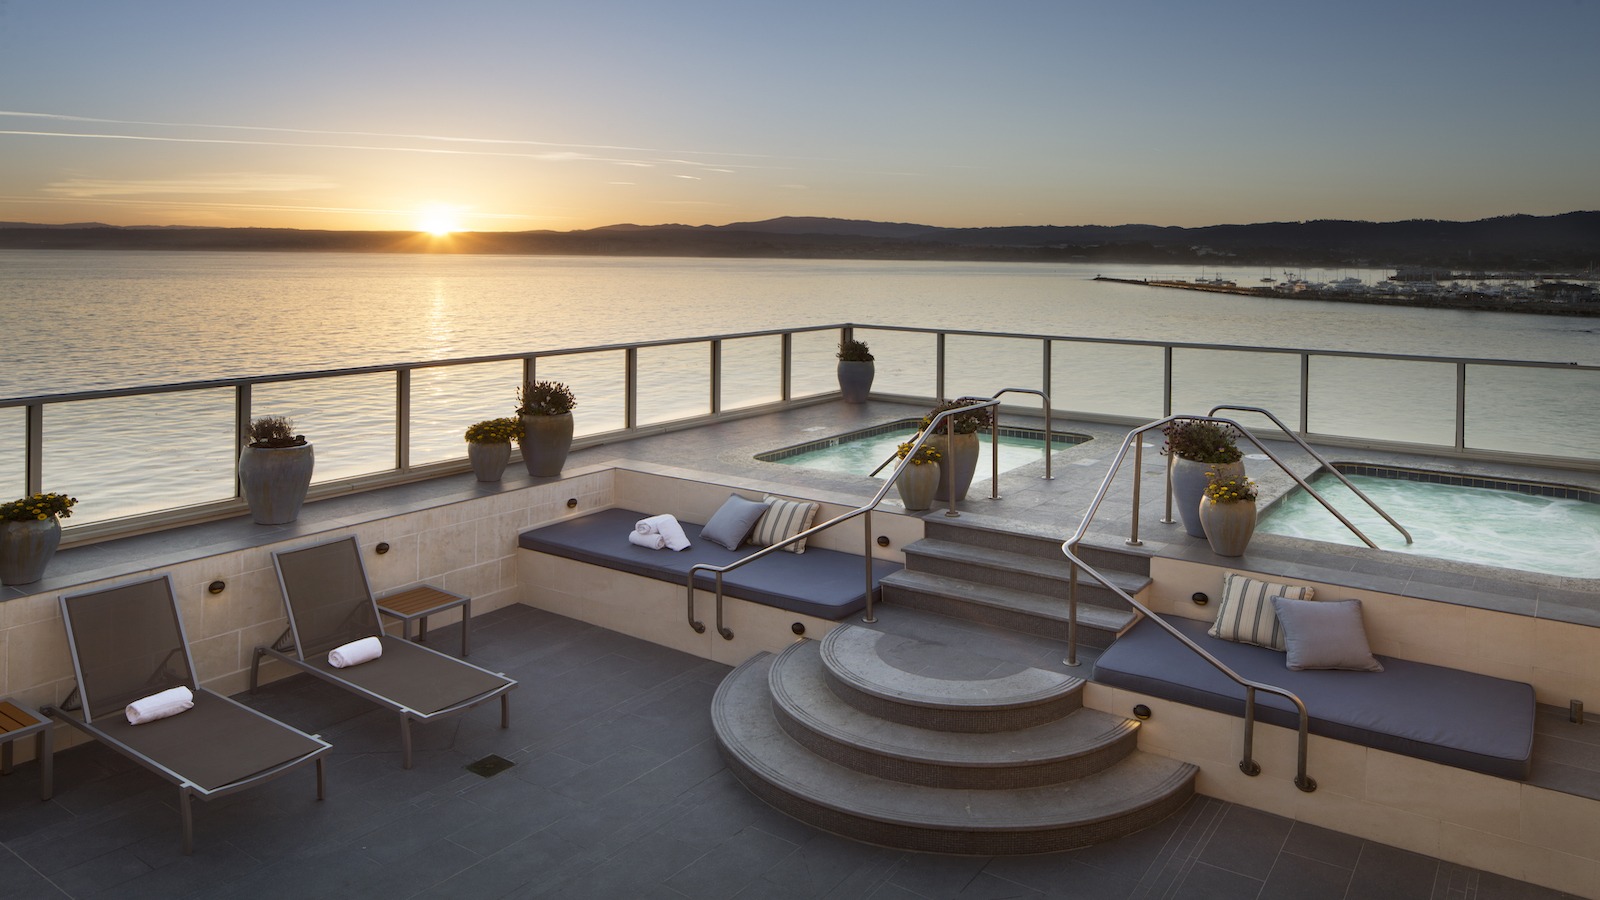 The best wellness and spa hotels in Monterey. Spa and pool chairs on a bay-facing patio at the Monterey Plaza Hotel and Spa in Monterey, California.